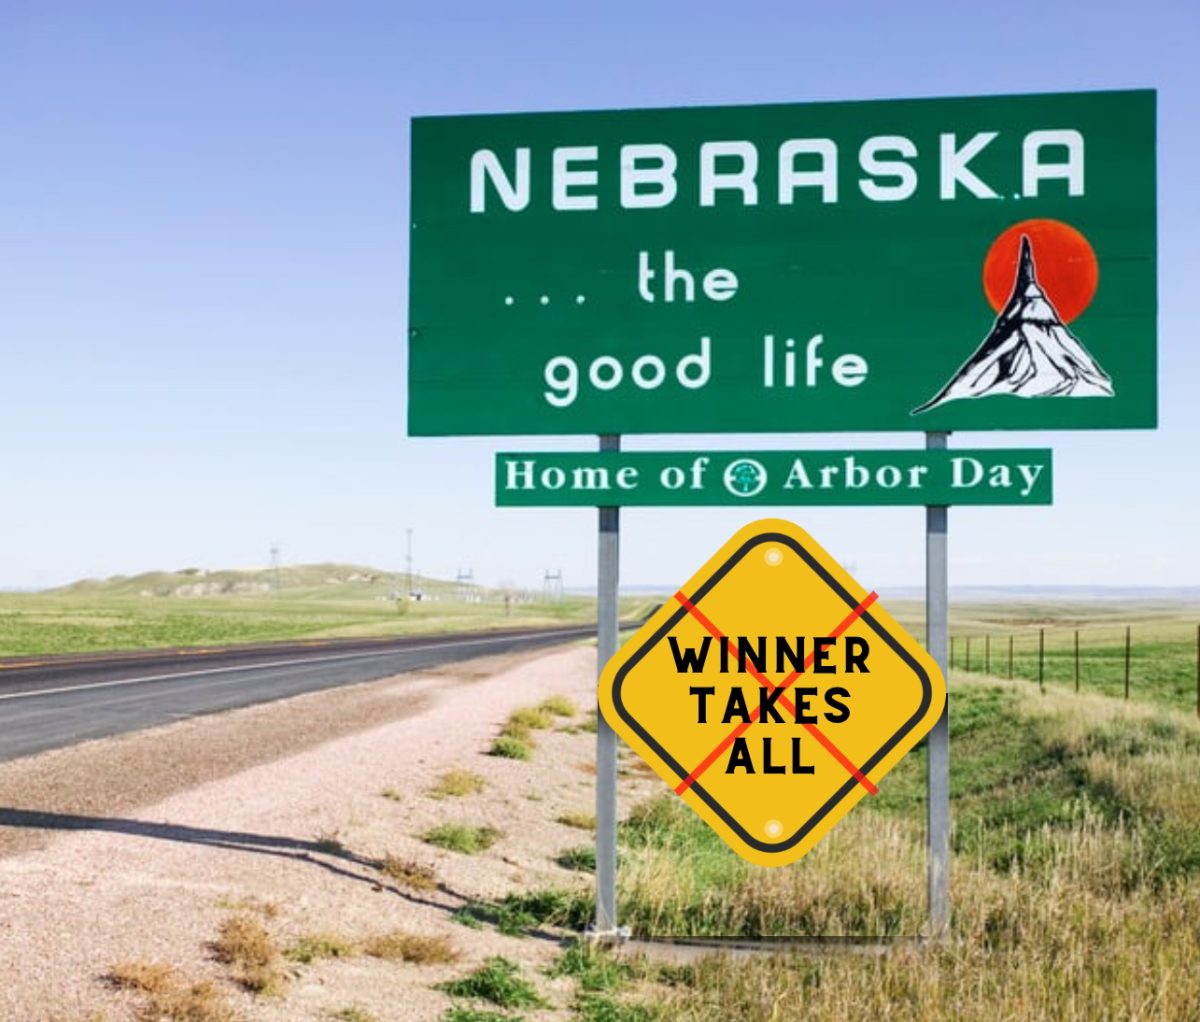 Image+of+Nebraska+road+sign+and+a+yellow+hazard+containing+the+text+%E2%80%9Cwinner+takes+all%E2%80%9D+with+a+red+x+over+it.